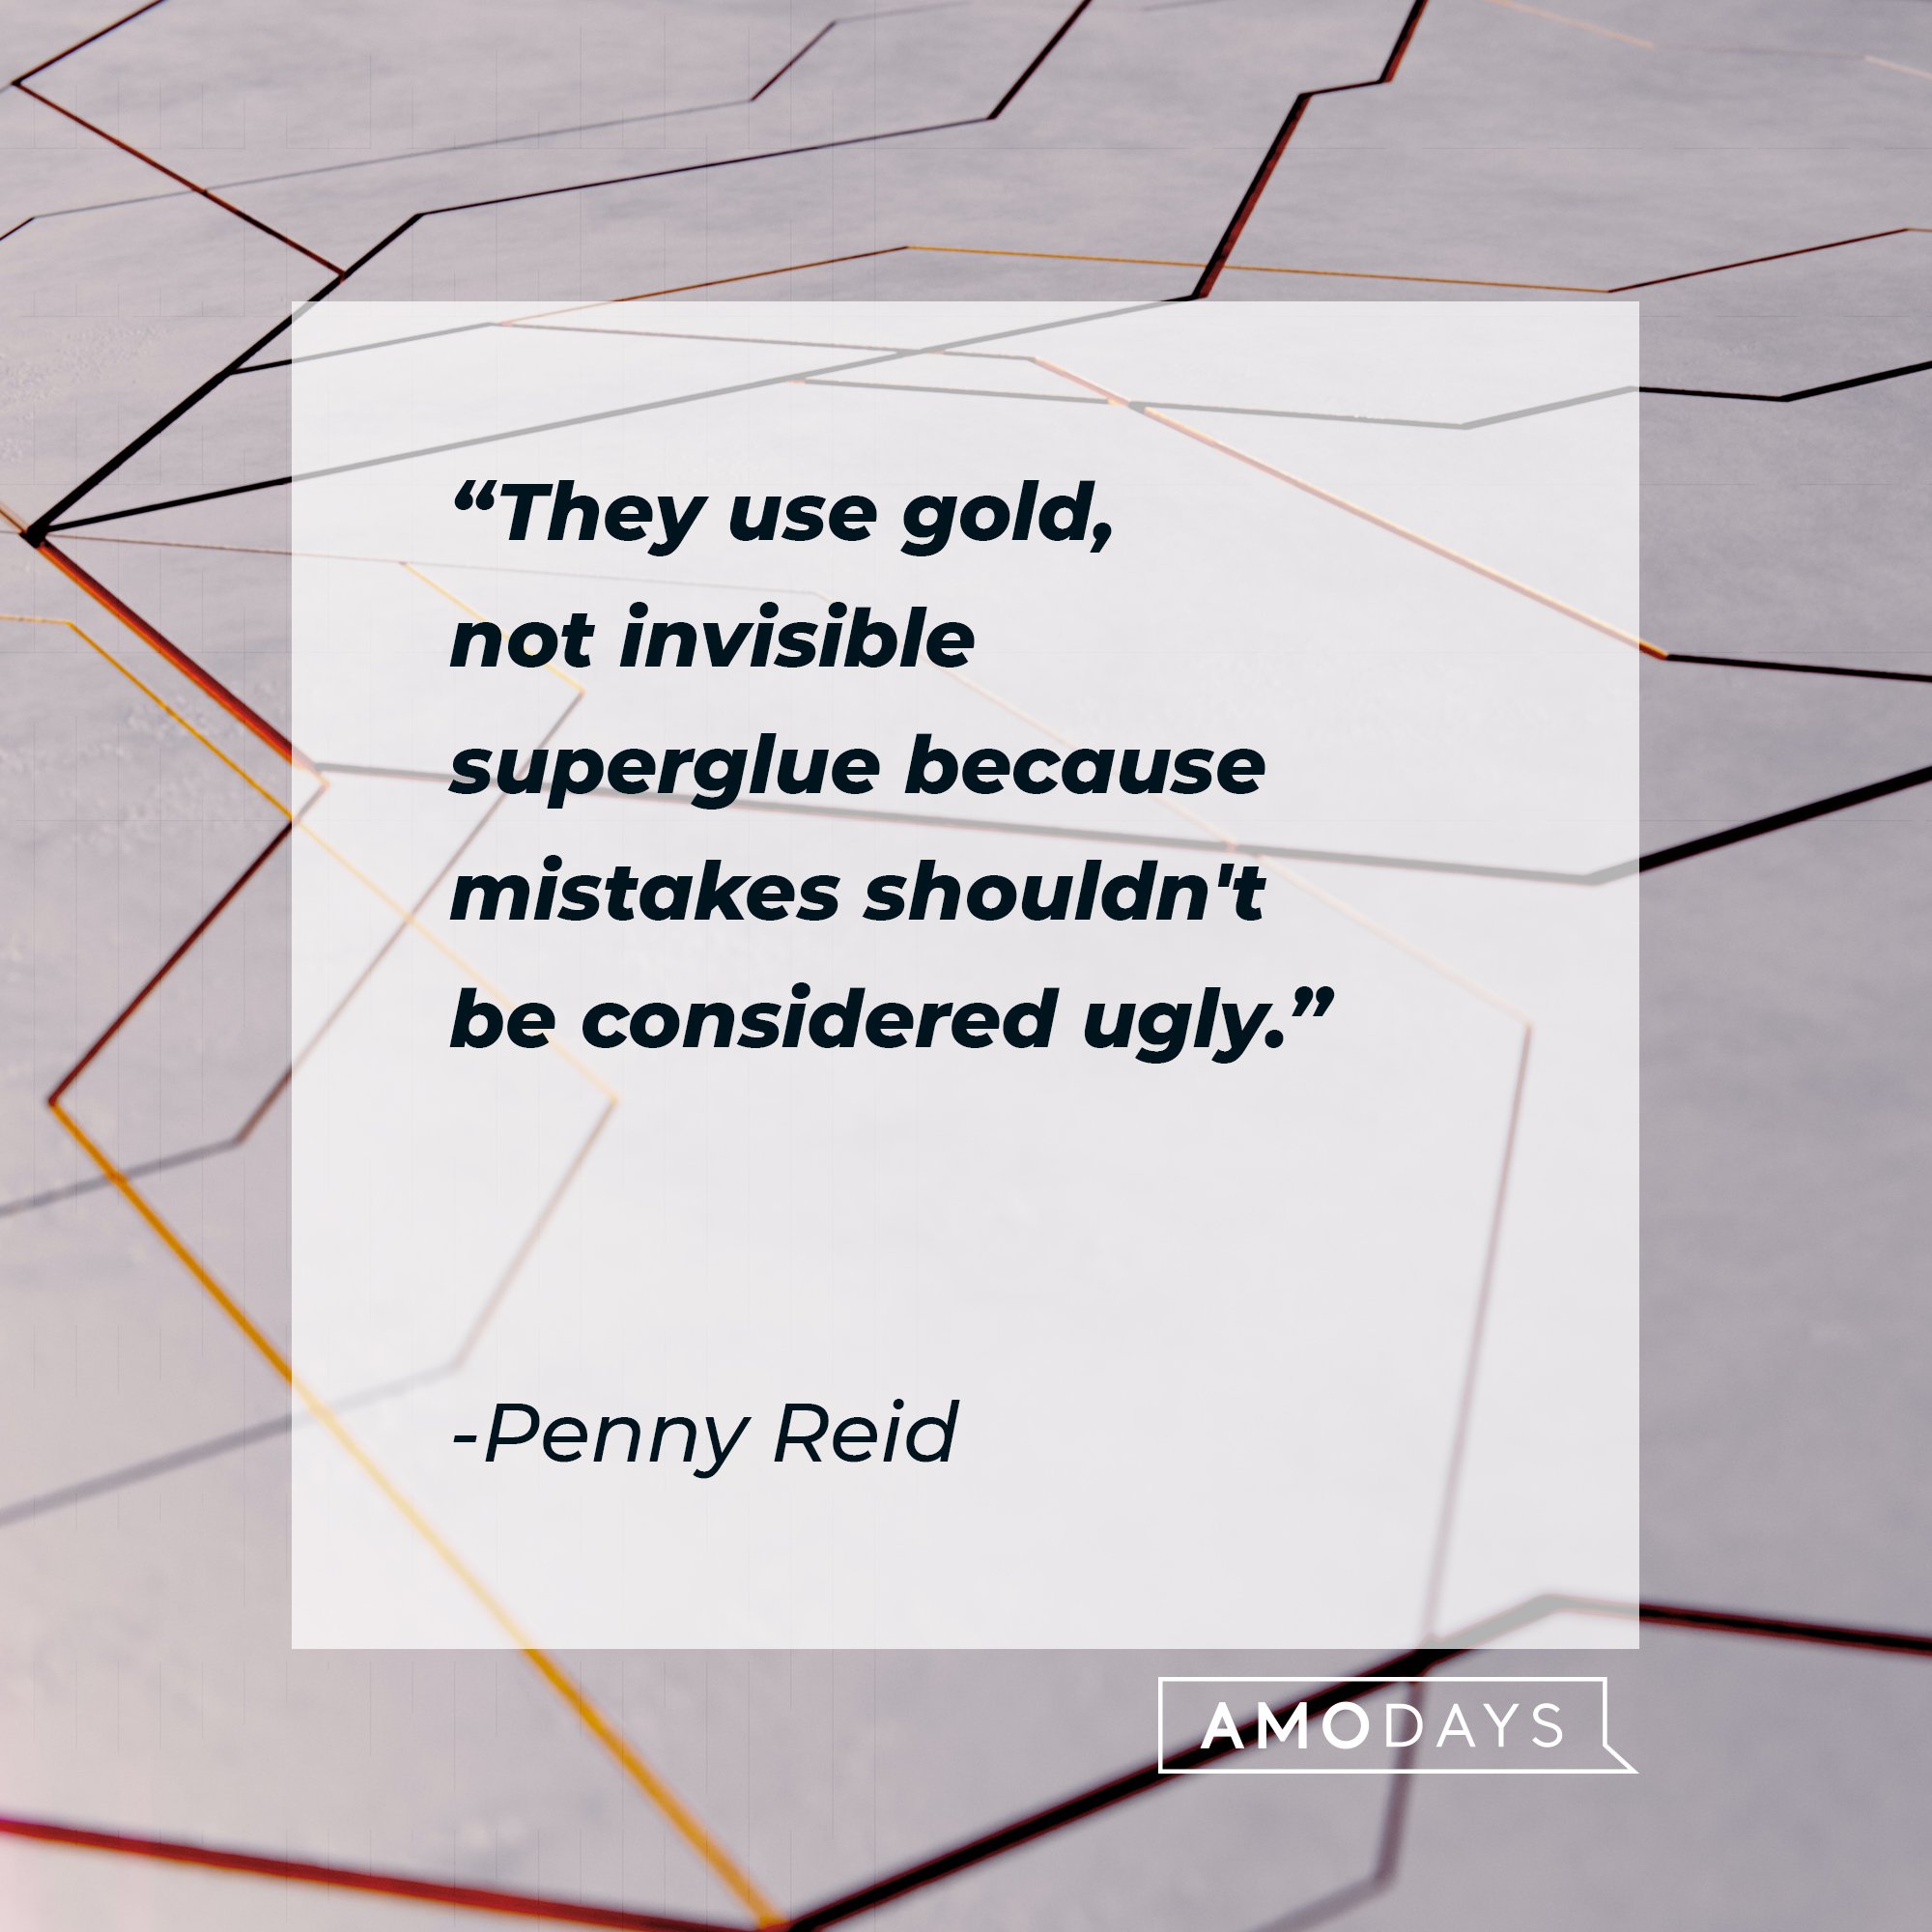 Penny Reid's quote: “They use gold, not invisible superglue because mistakes shouldn't be considered ugly." | Image: AmoDays